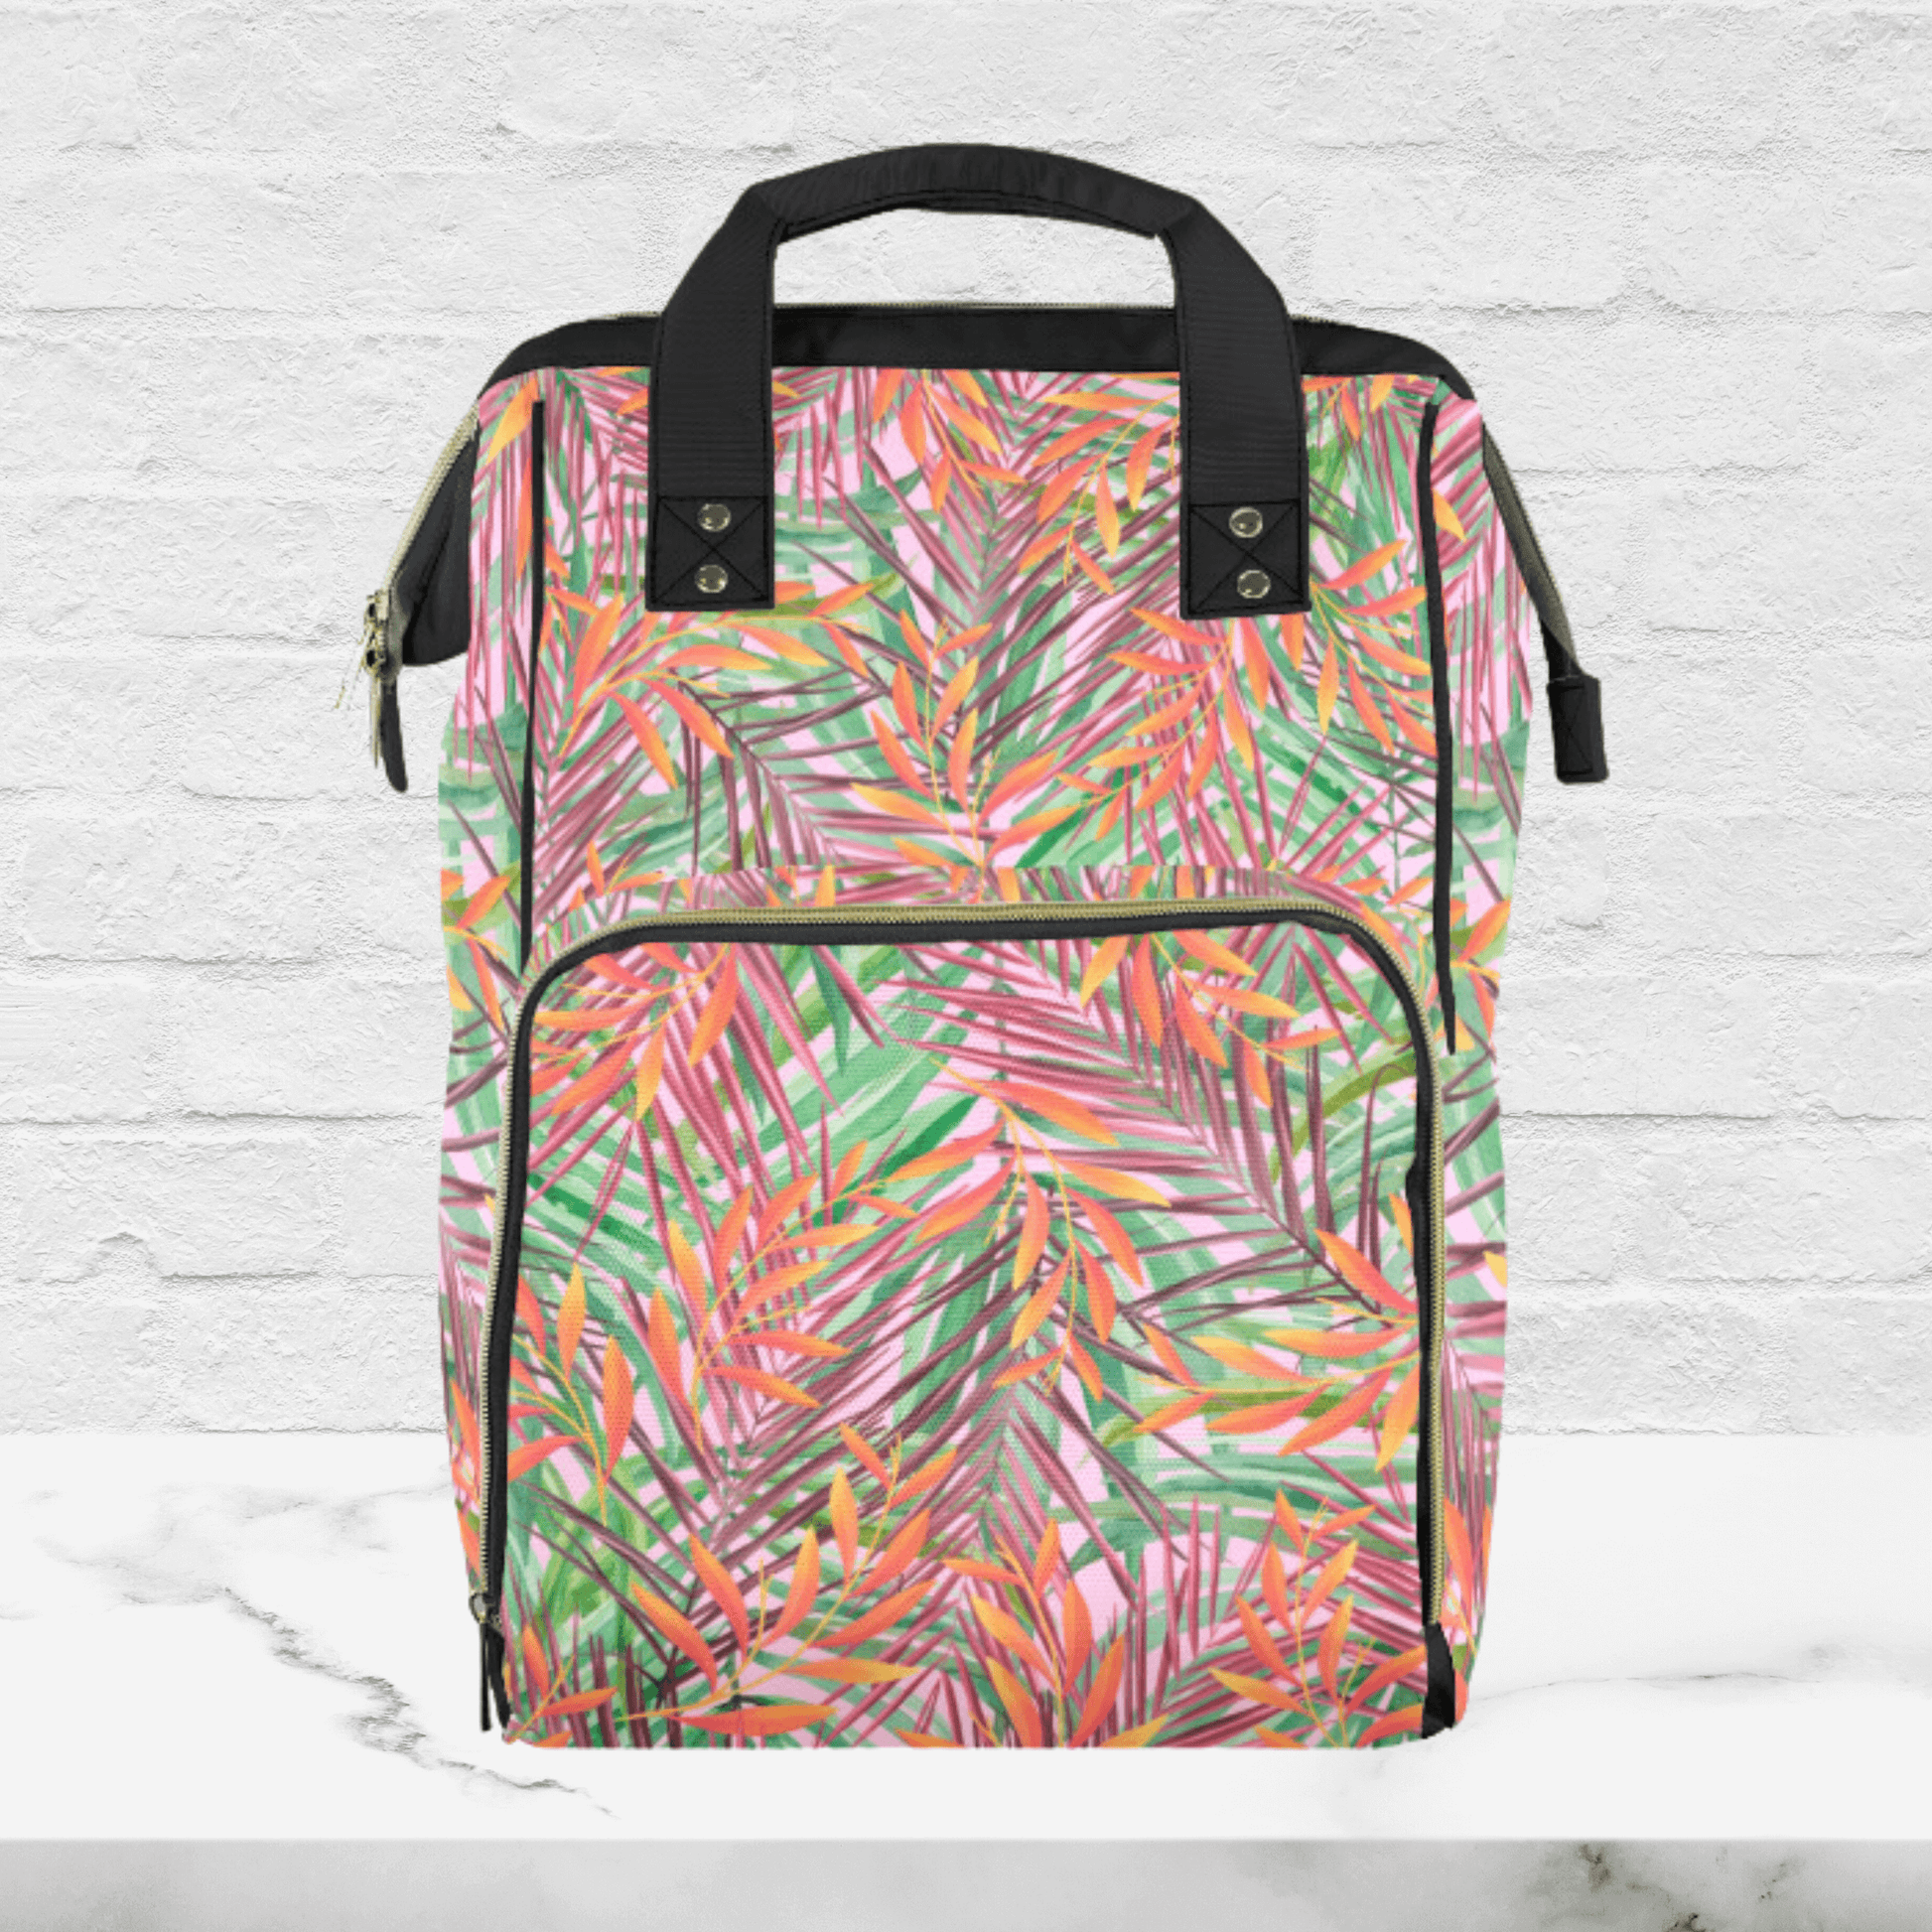 Our summer tropical island leaves diaper bag is the perfect colorful bag this summer. The orange, green and pink leaves are a fun addition to any outfit.